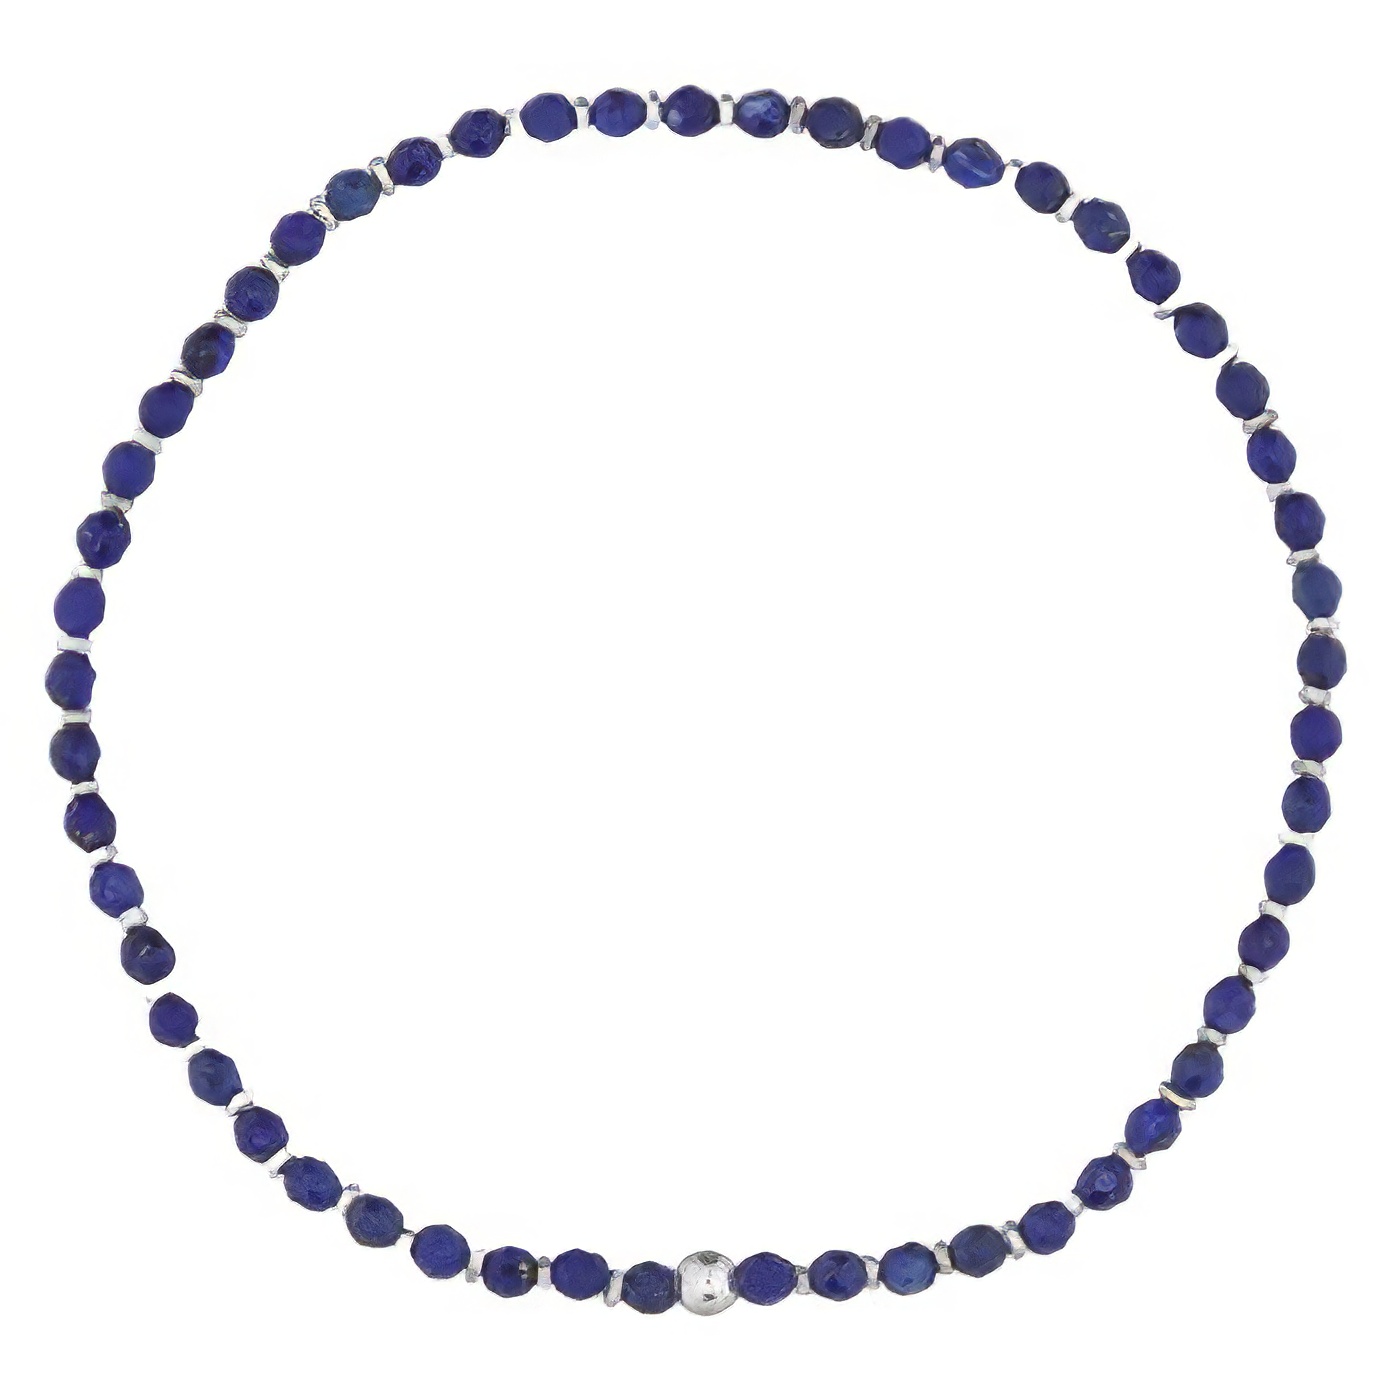 Faceted Lapis Lazuli Stretchable Bracelet With 925 Silver by BeYindi 